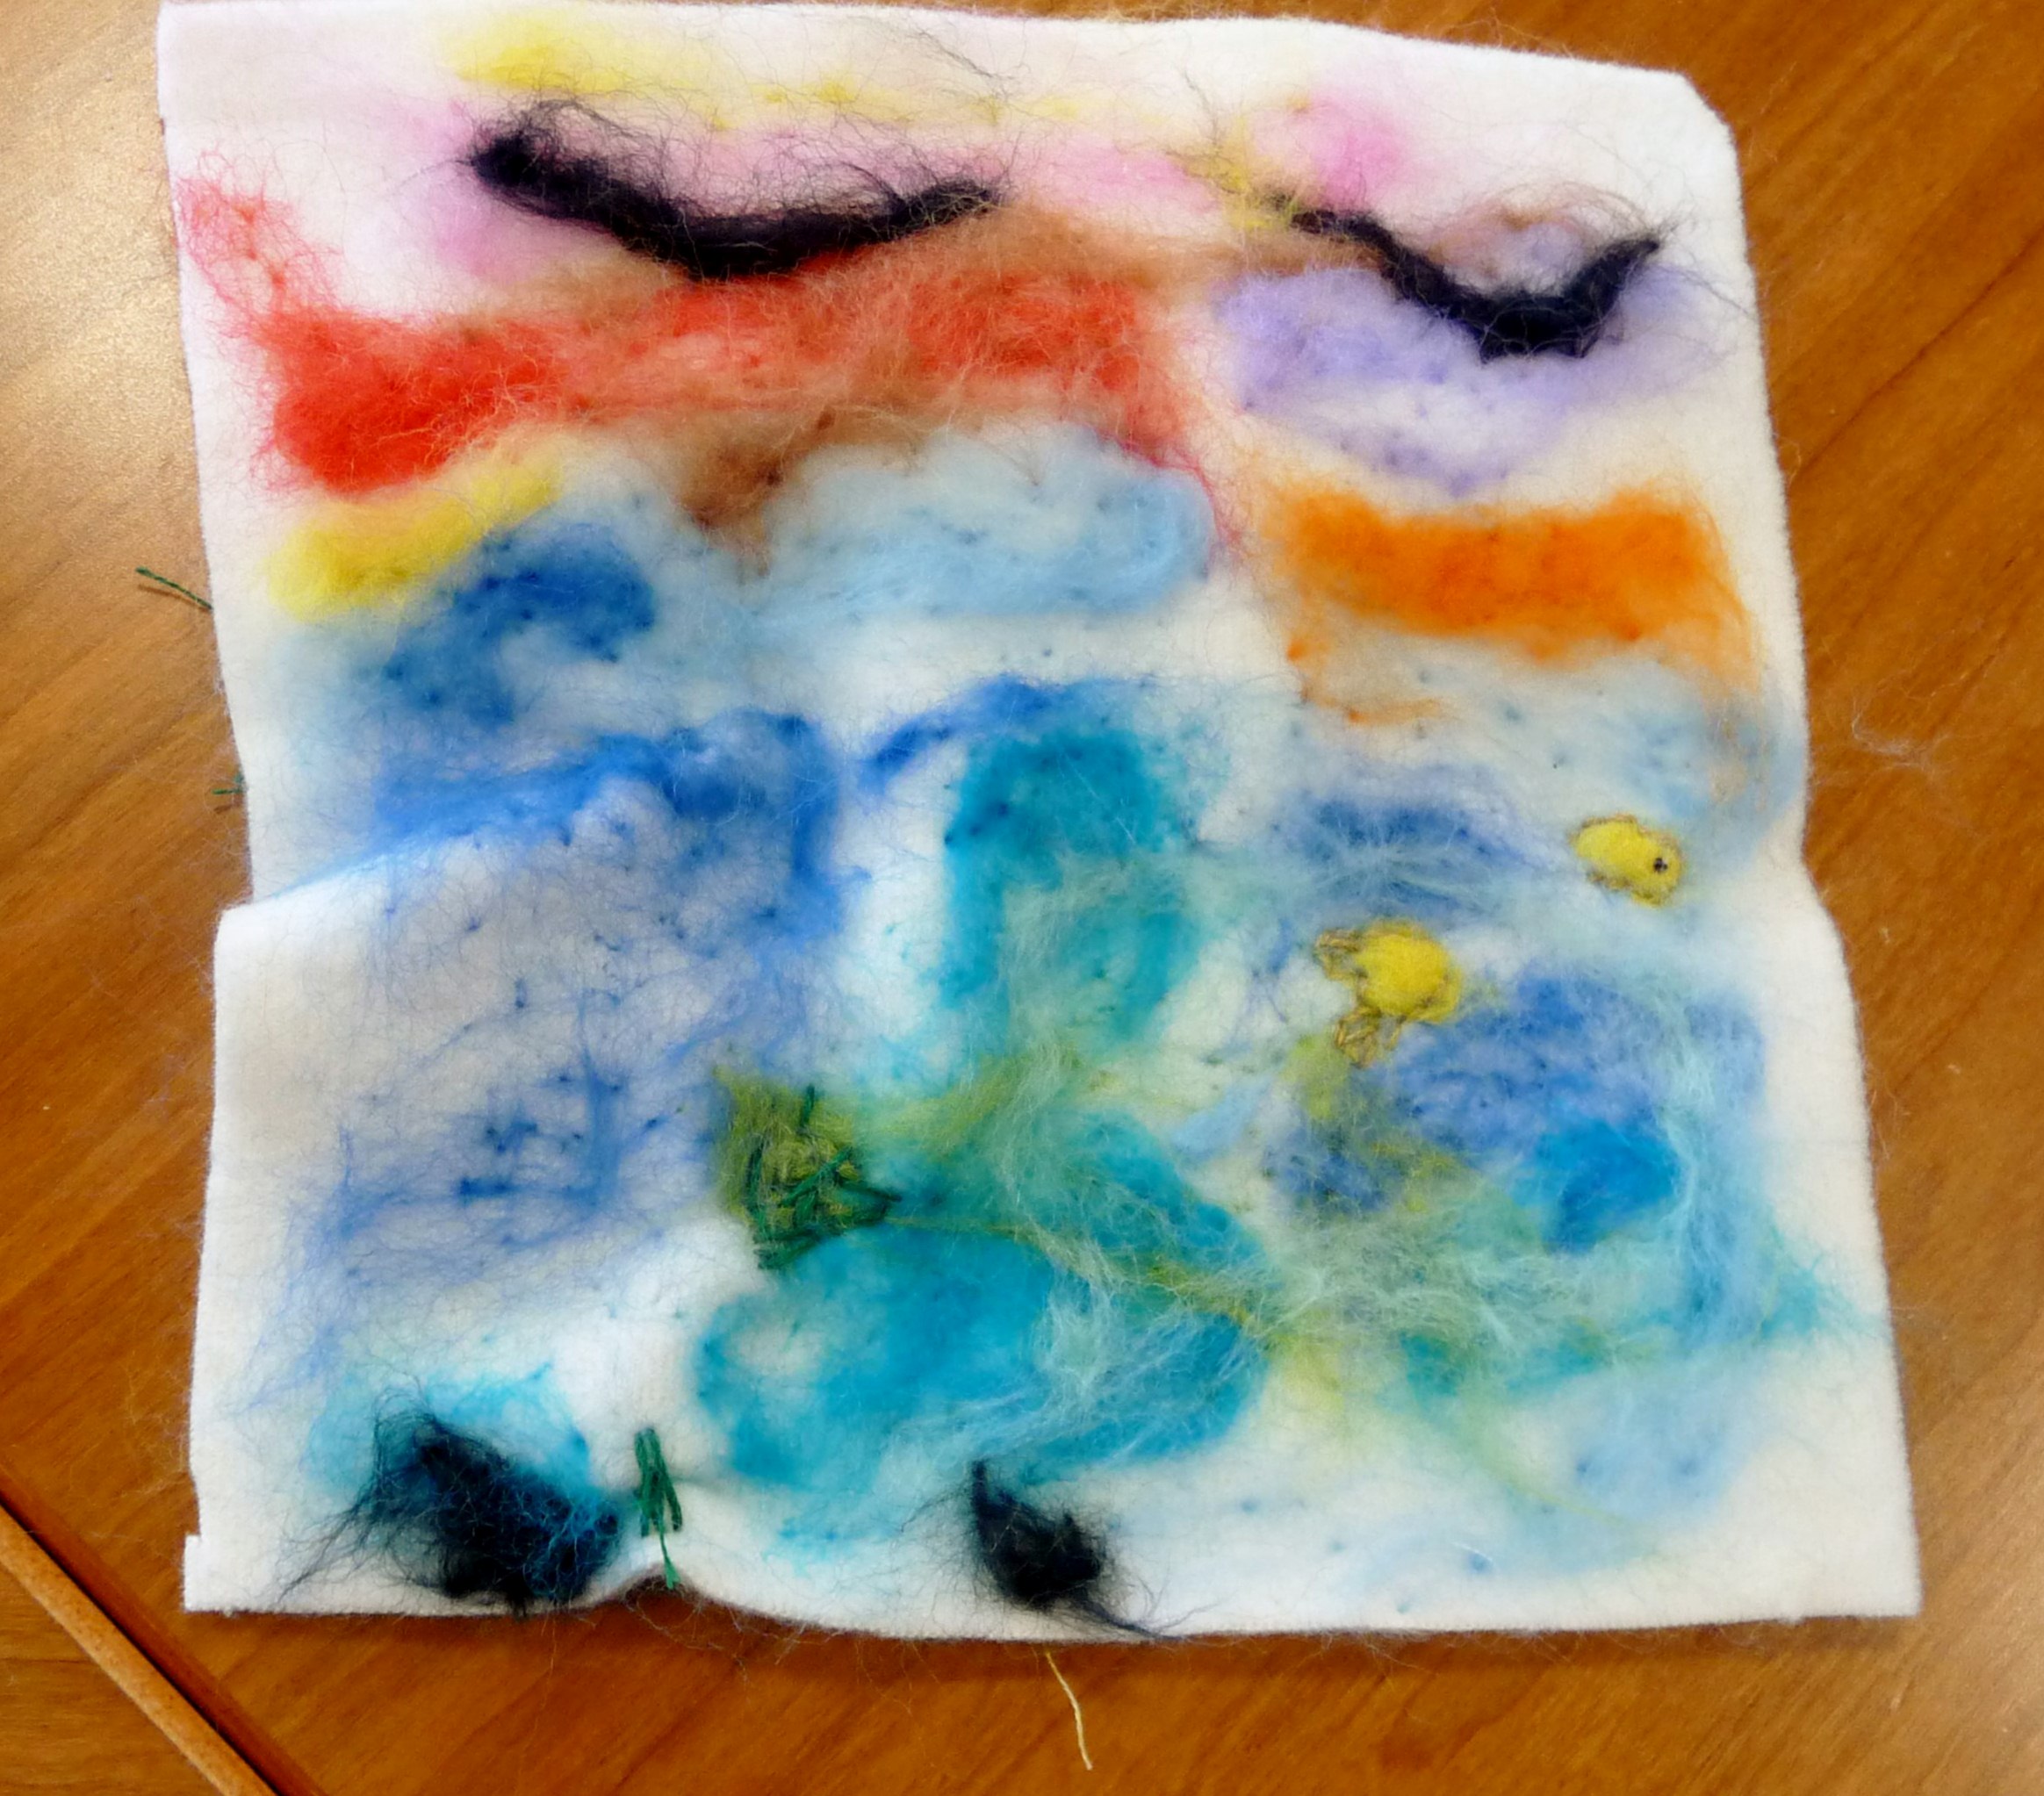 YE group May 2015. This is Annaleise's completed needlefelted seascape